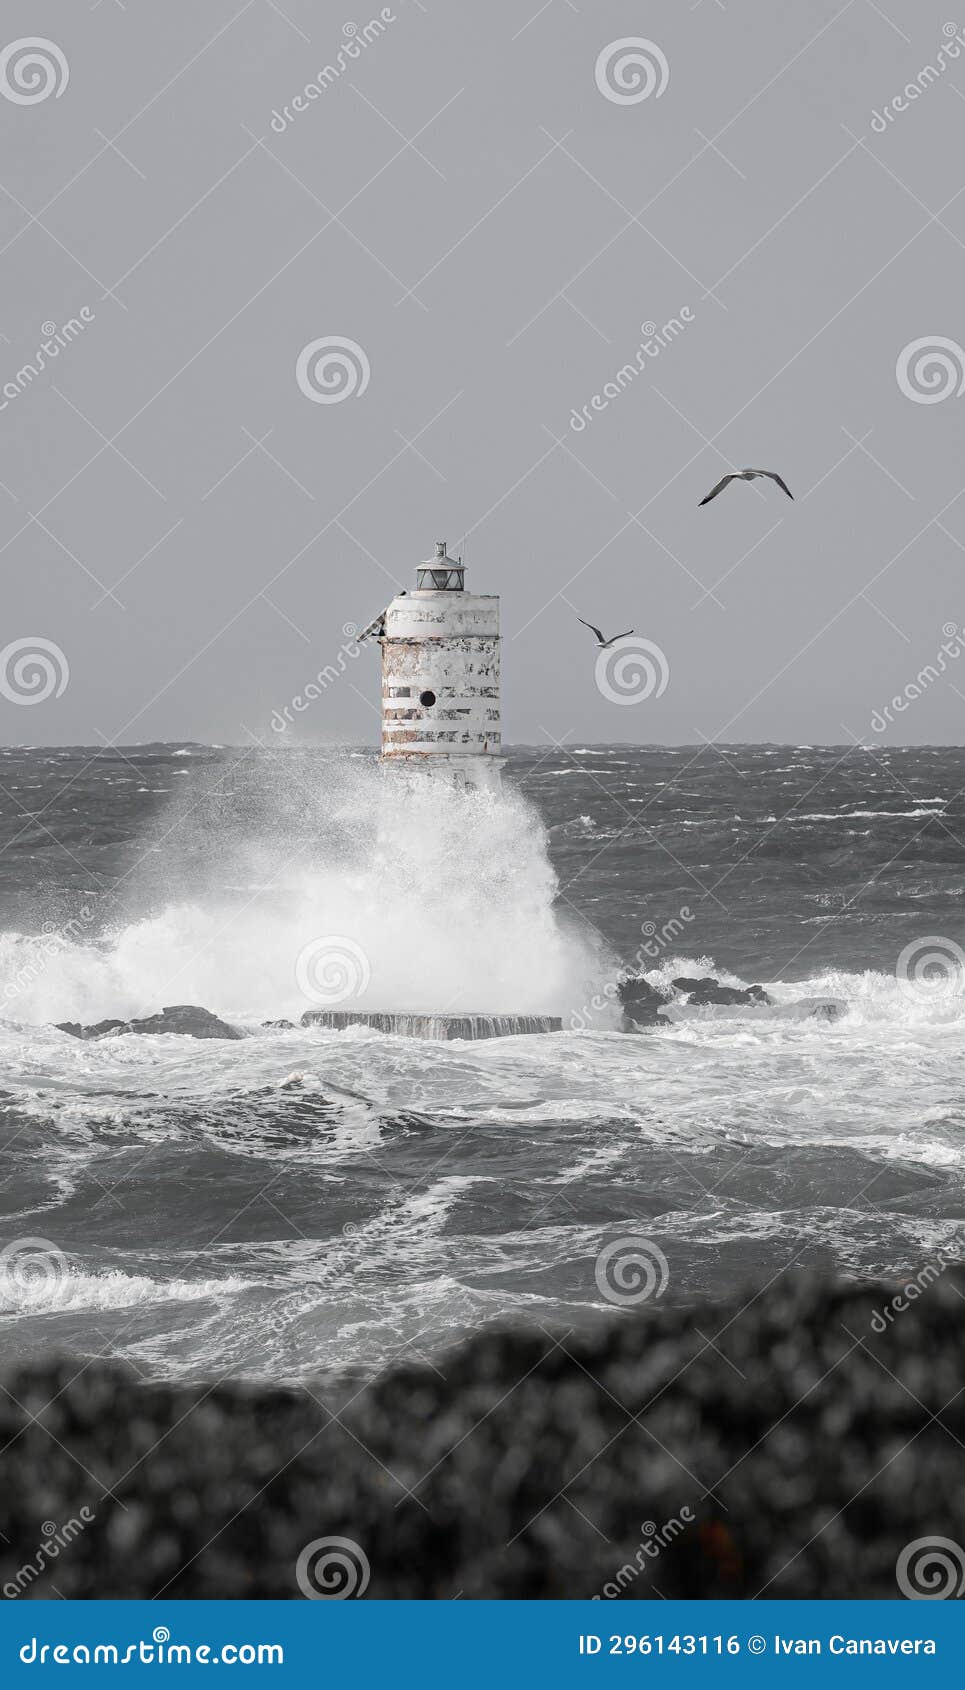 lighthouse storm - mangiabarche lighthouse during a winter swell